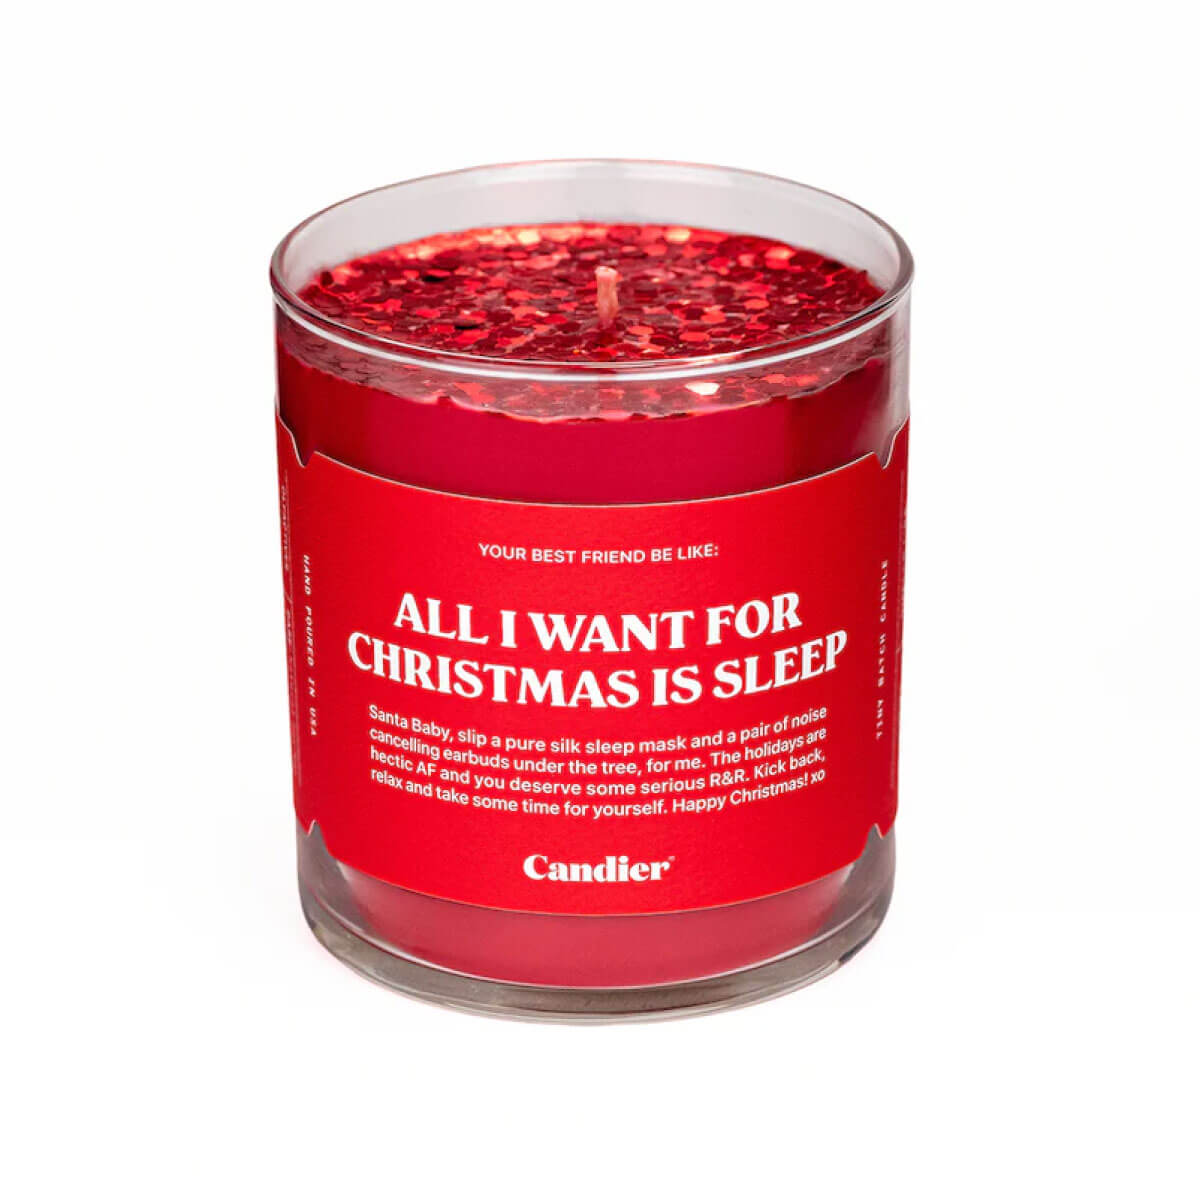 All I Want Glitter Candle by Candier red front | MILK MONEY milkmoney.co | soy wax candles, small candles. natural candles, organic candles, scented soy candles, concrete candle, hand poured candles, hand poured soy candles, cement candle, hand poured soy wax candles, scented hand poured candles, hand poured scented candles